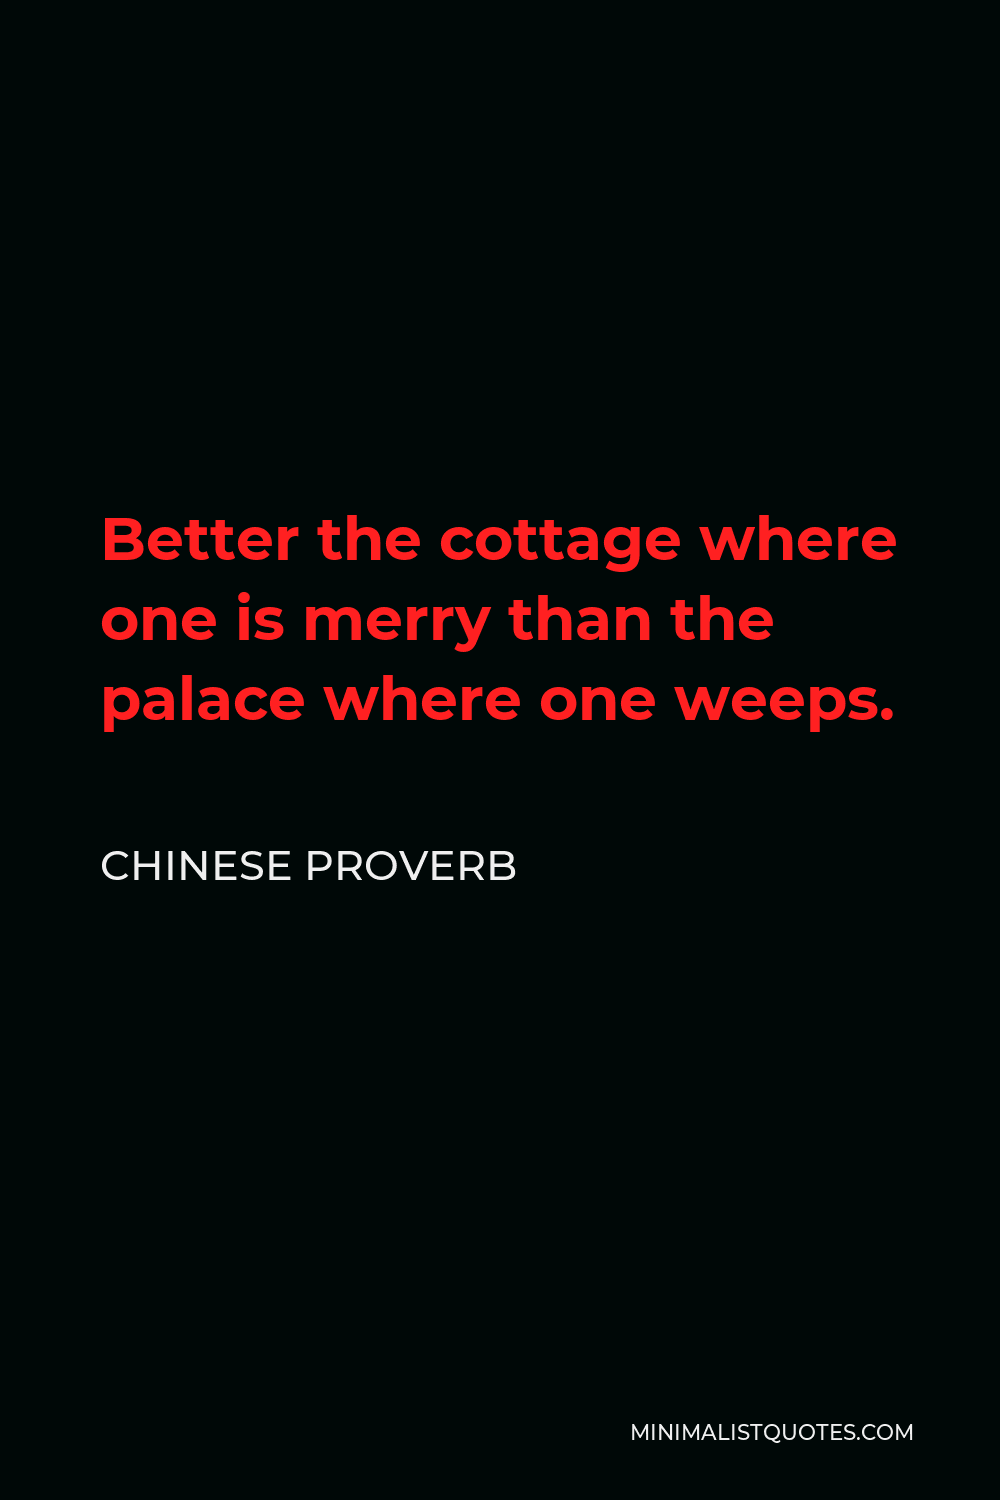 Chinese Proverb Quote - Better the cottage where one is merry than the palace where one weeps.